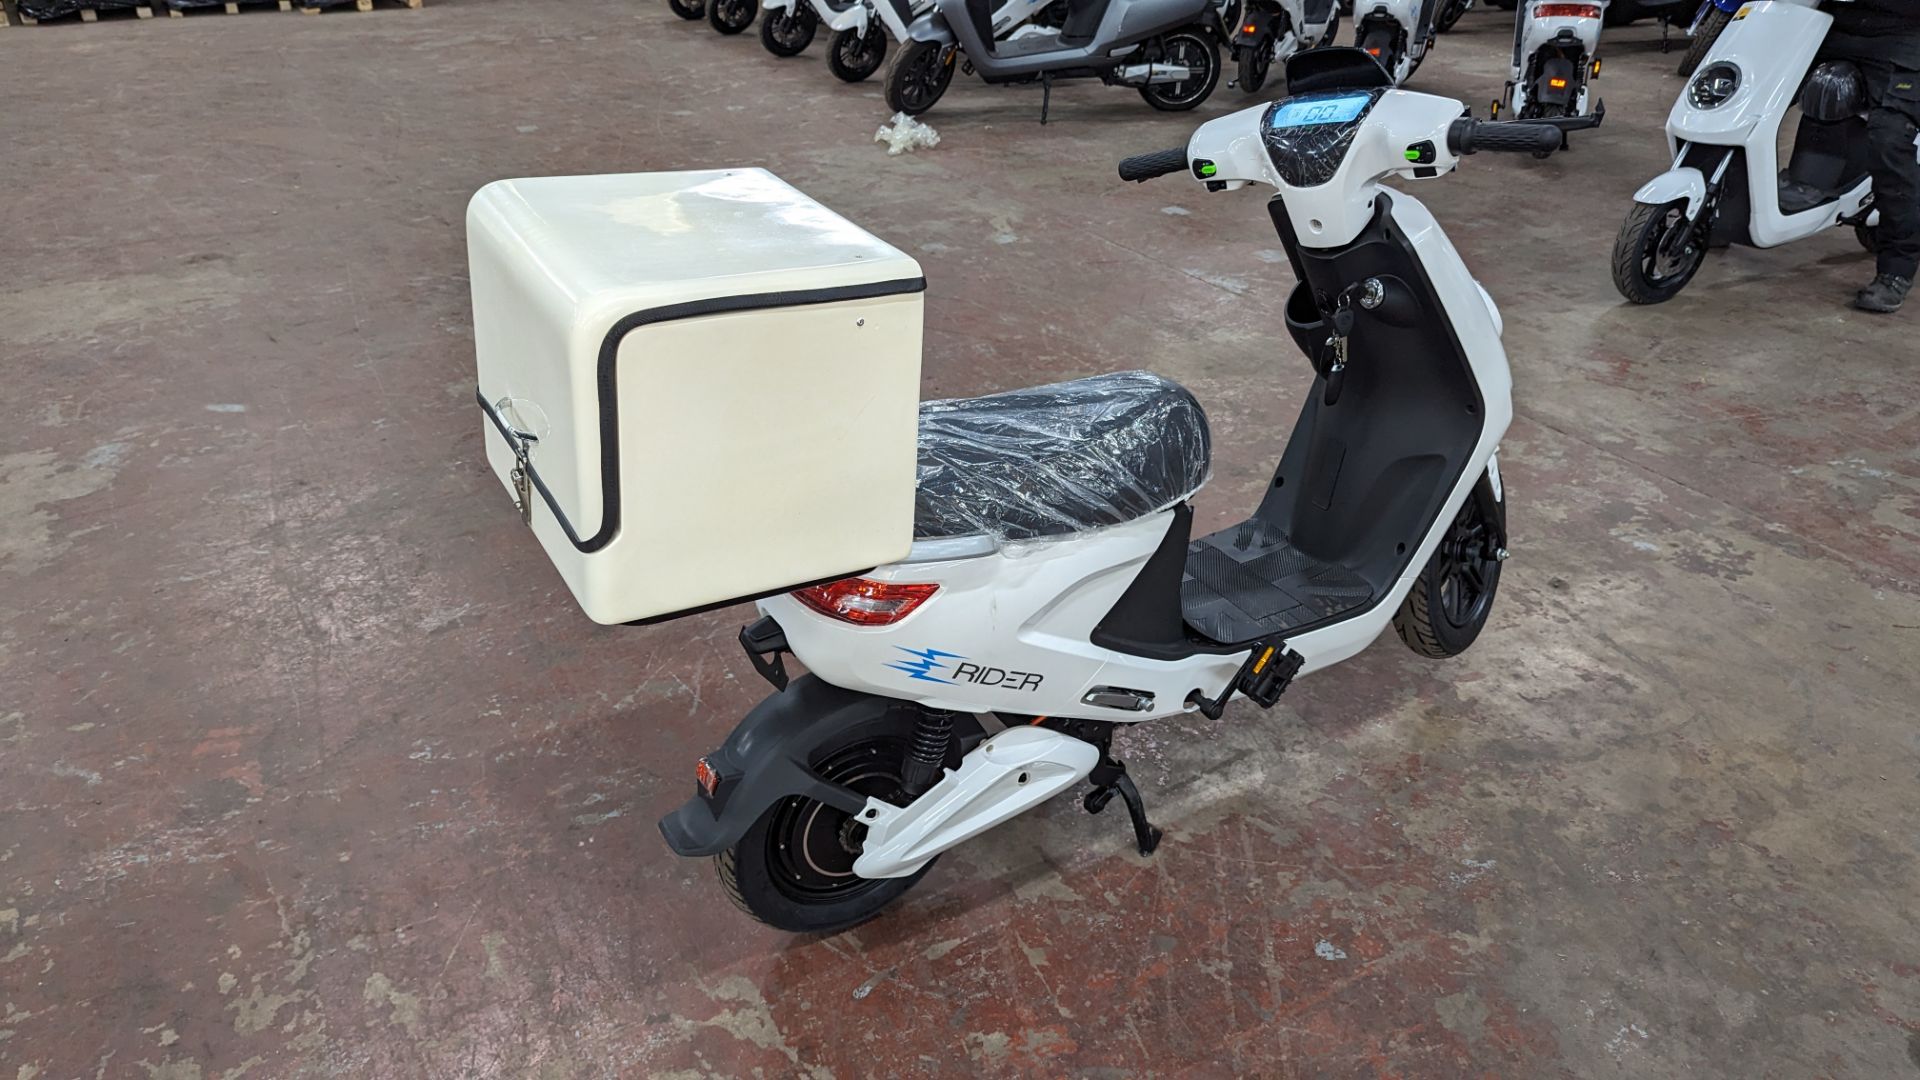 Model 18 Electric Bike: Zero (0) recorded miles, white body with black detailing, insulated box moun - Image 5 of 12